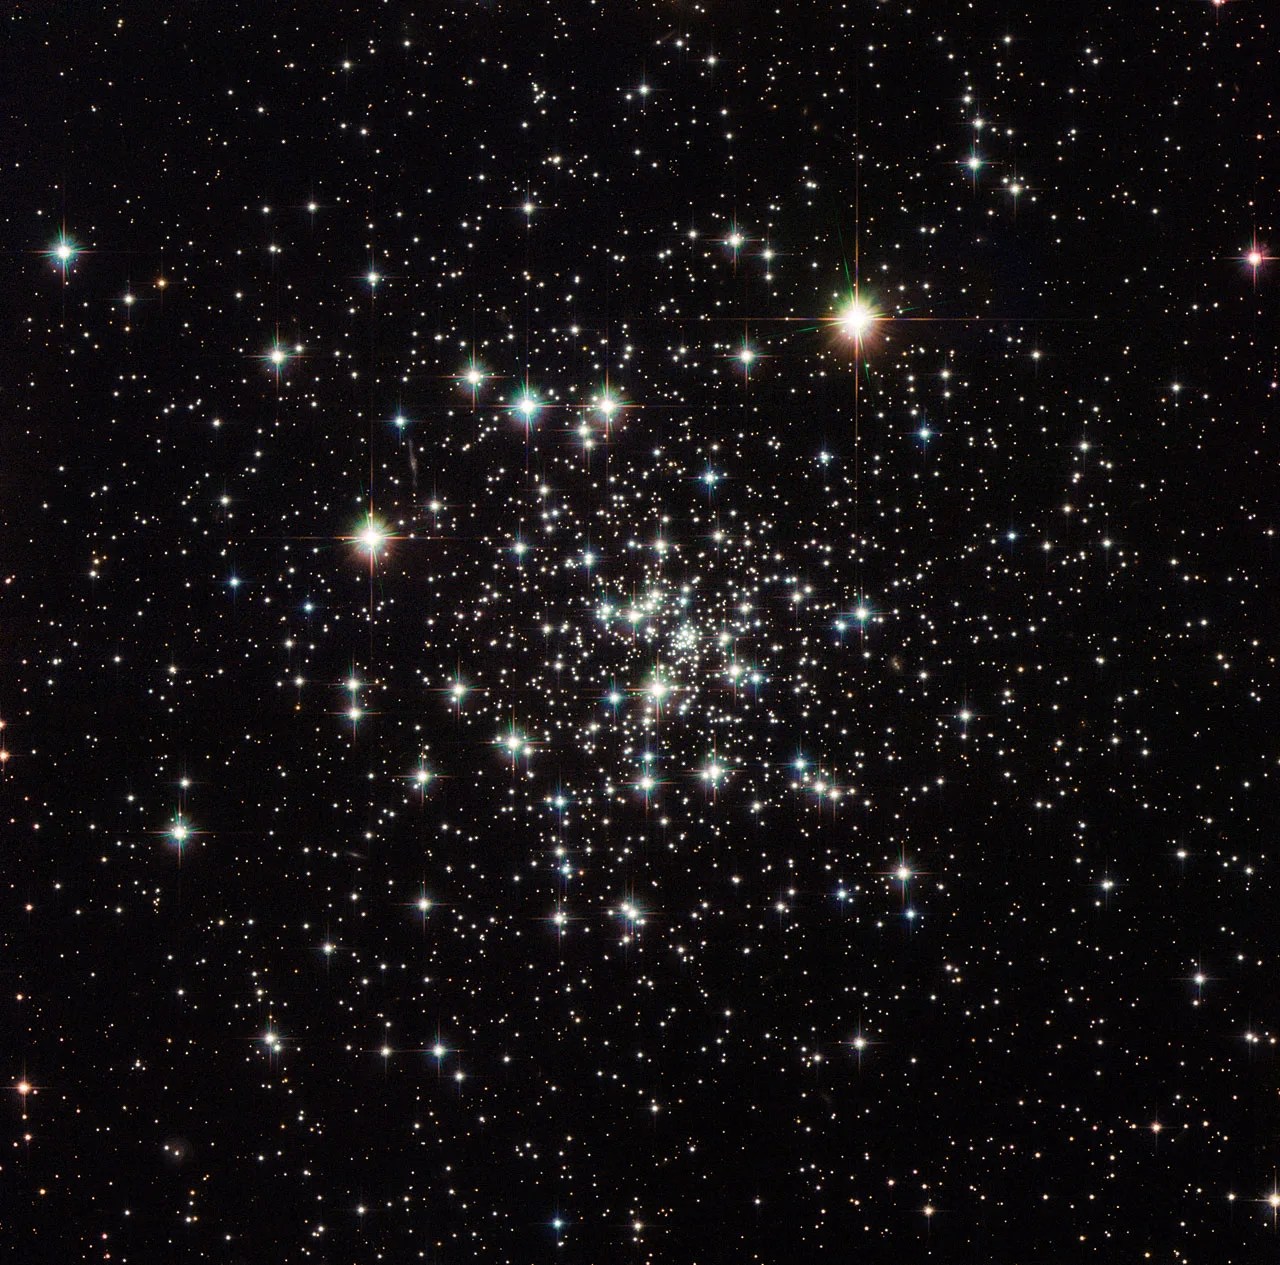 A loose concentration of a multitude of bright white stars on a black background, with the higher concentration of stars toward the center of the grouping.